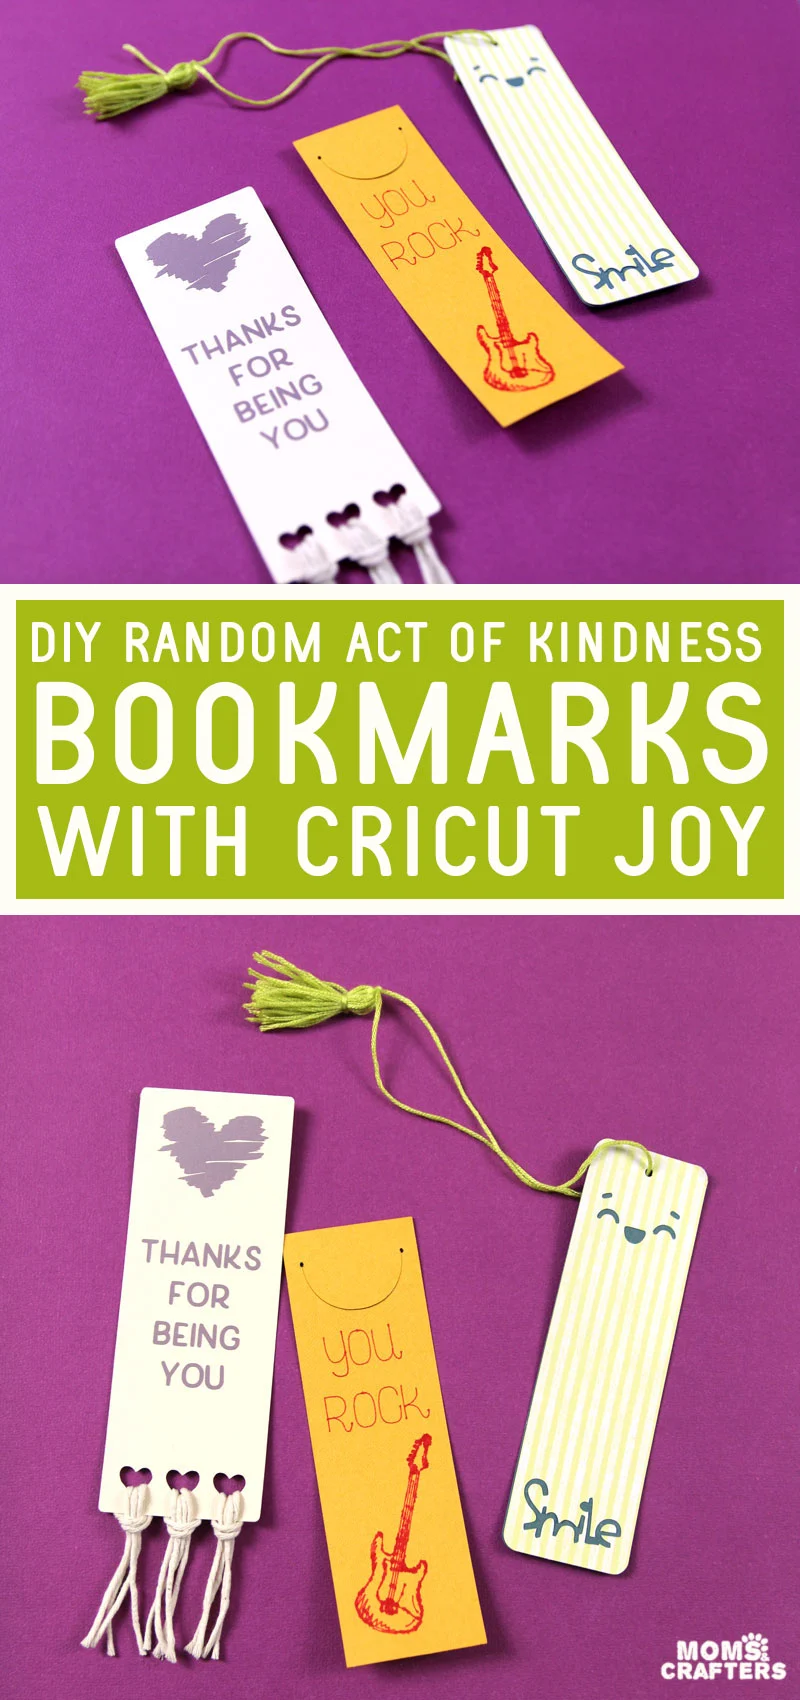 How To Make Paper Bookmarks With Cricut